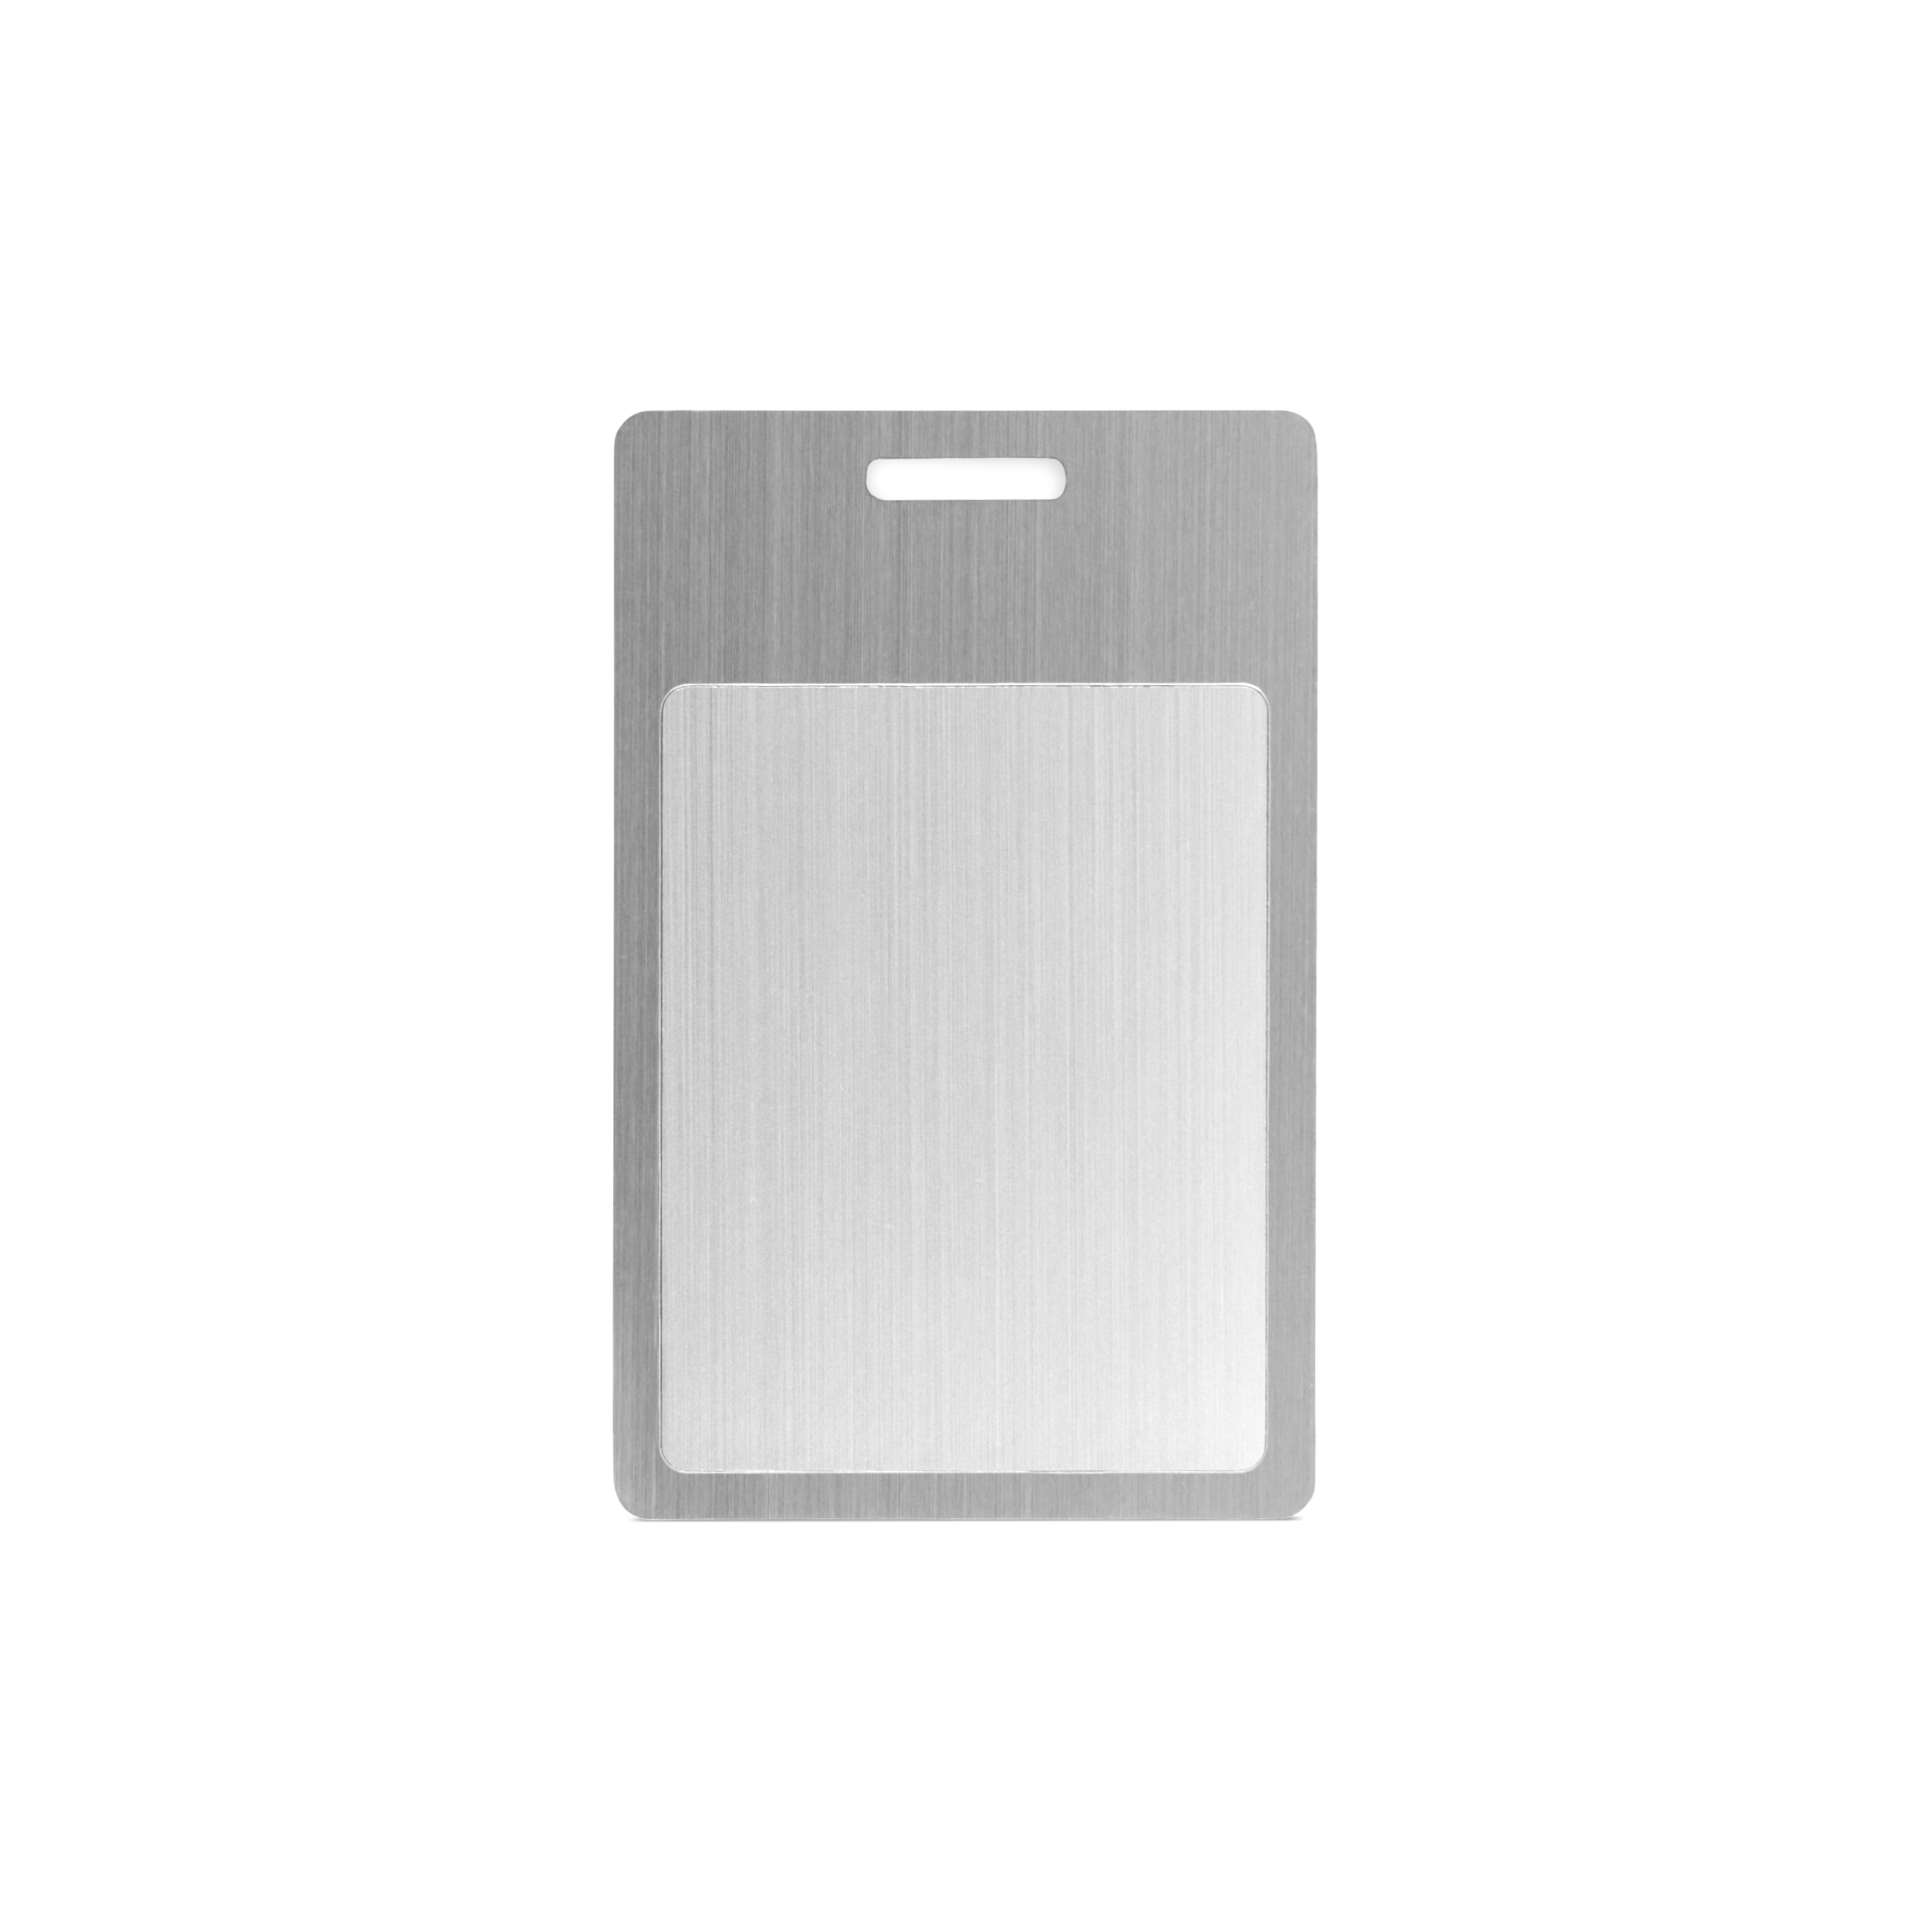 NFC card metal - 85,6 x 54 mm - NTAG213 - 180 bytes - silver - portrait format with slot